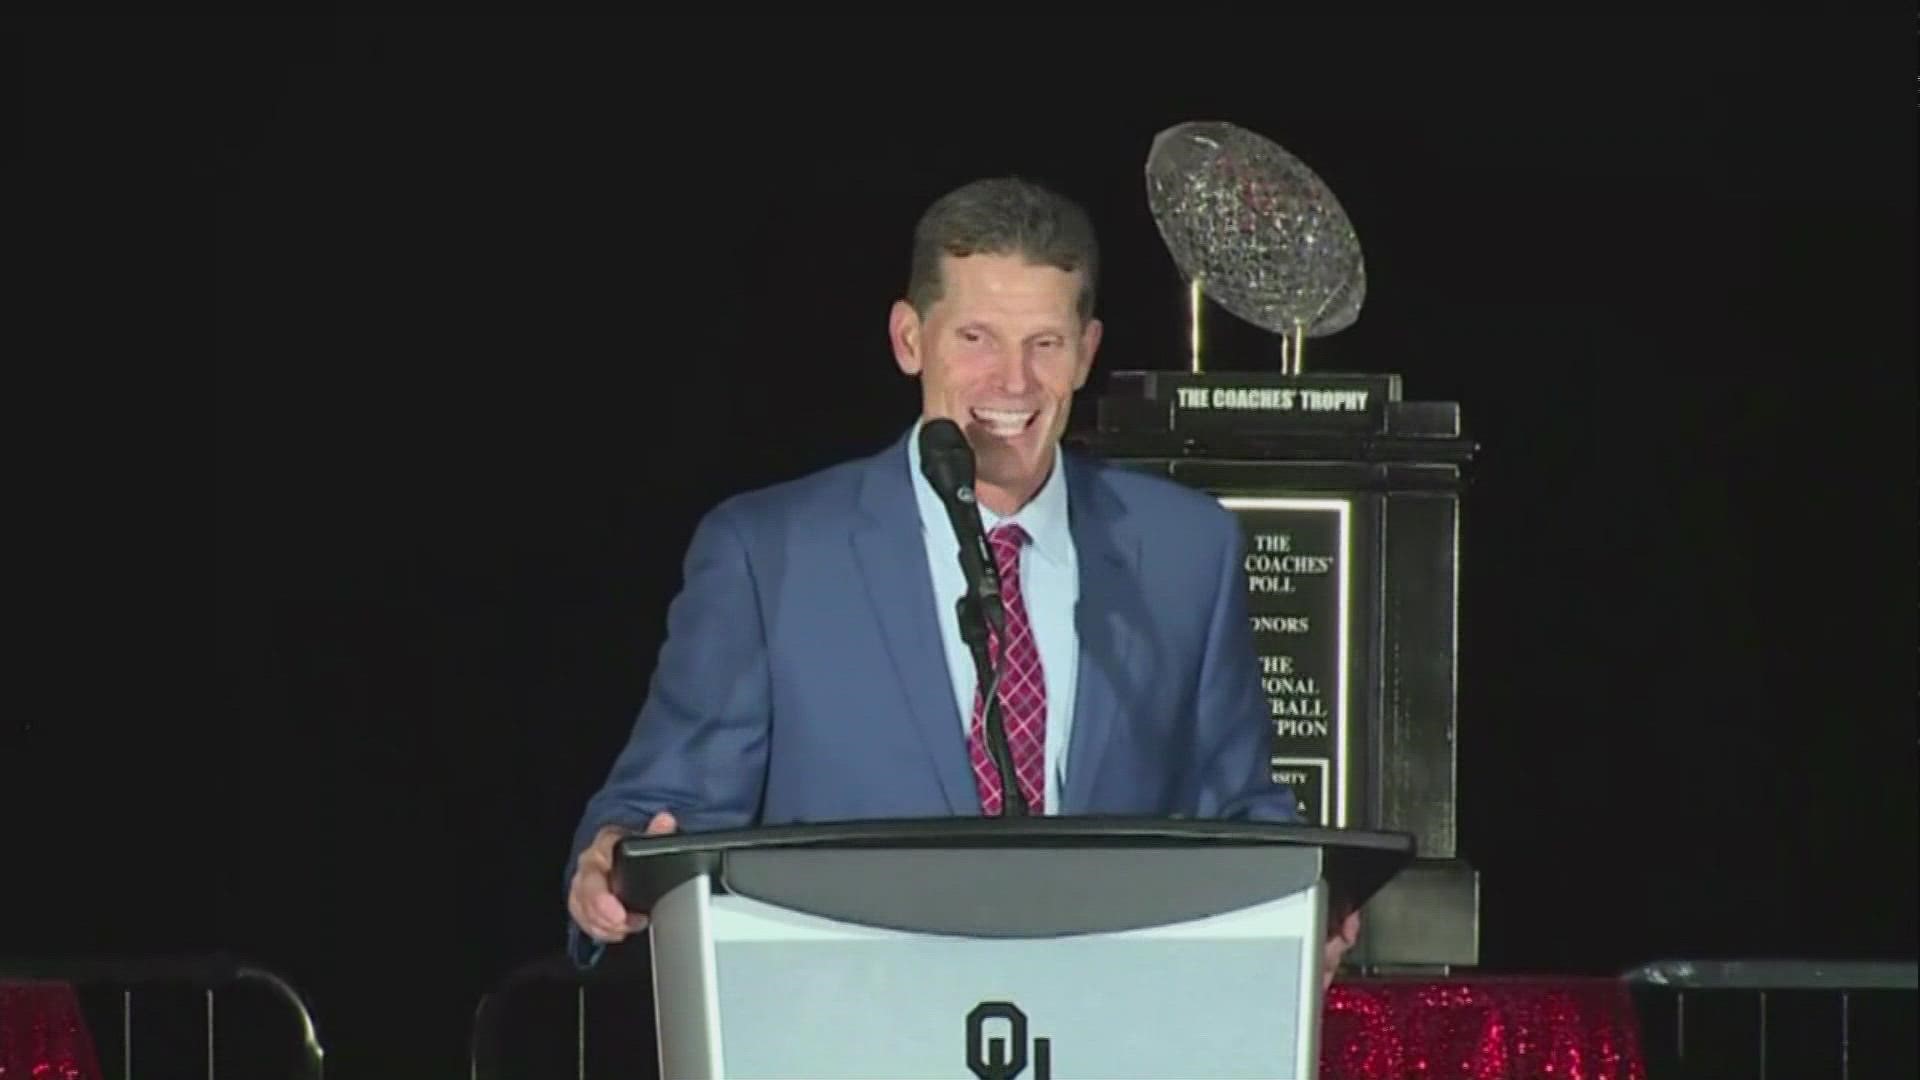 Former University of Oklahoma defensive coordinator Brent Venables returns to OU to become the university's new head football coach.